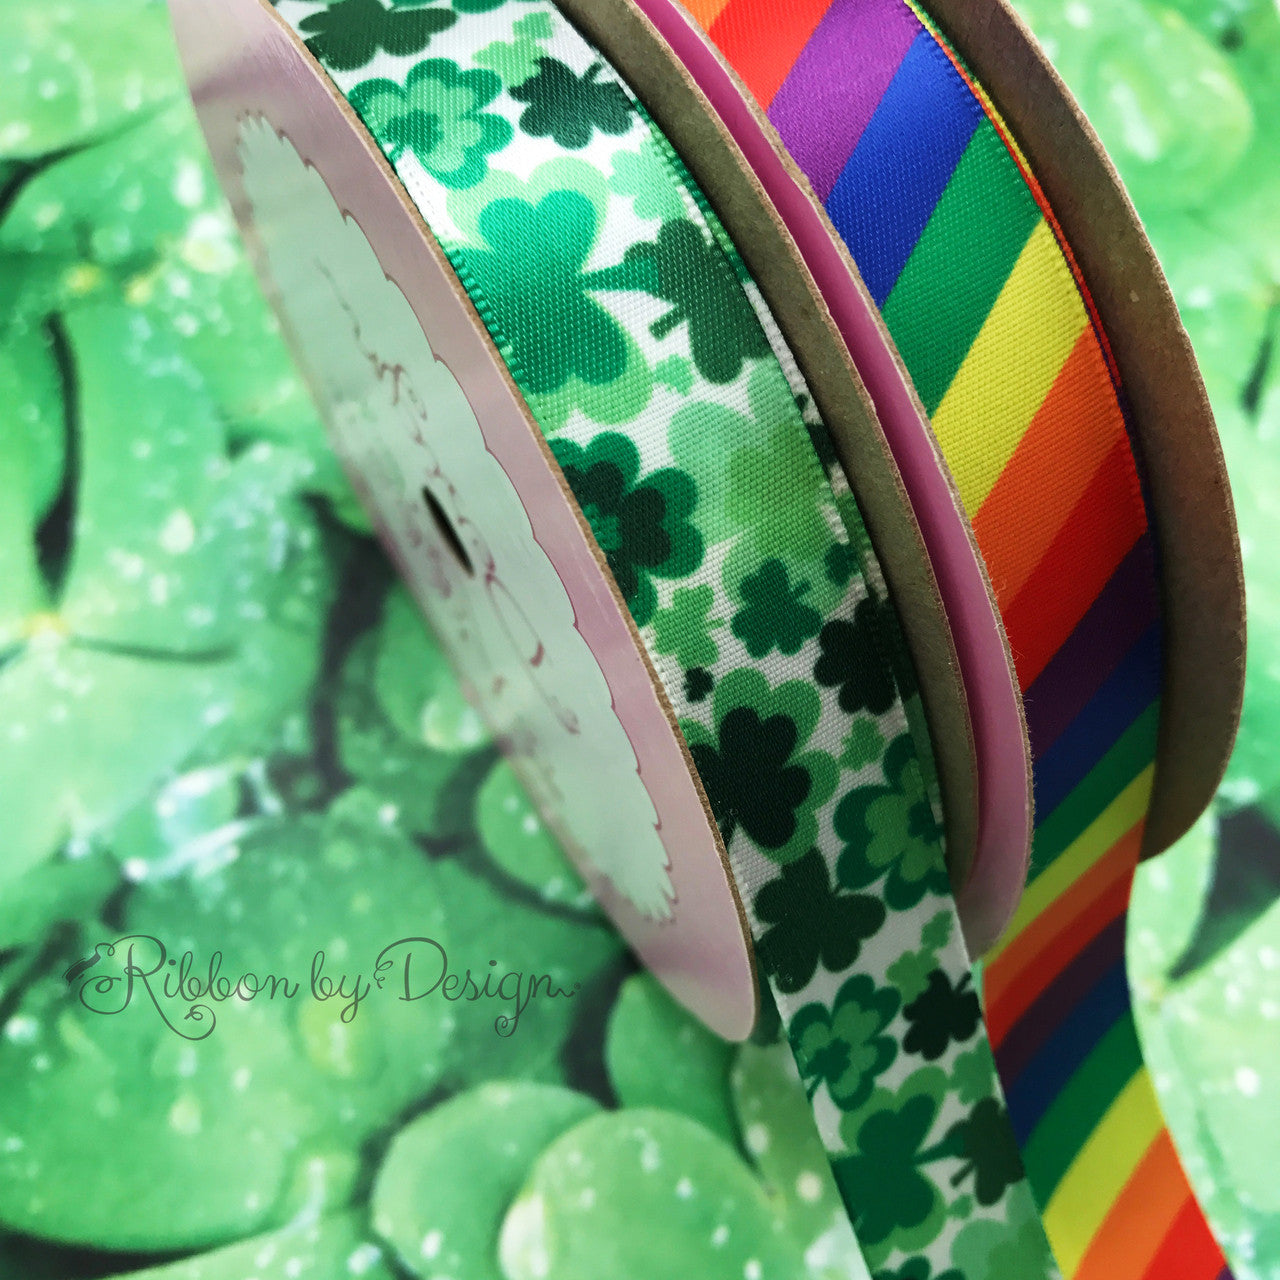 Pair our shamrocks with rainbow stripes for a fun and colorful St. Patricks day party! Maybe the leprechaun will hide a pot of gold under your rainbow!